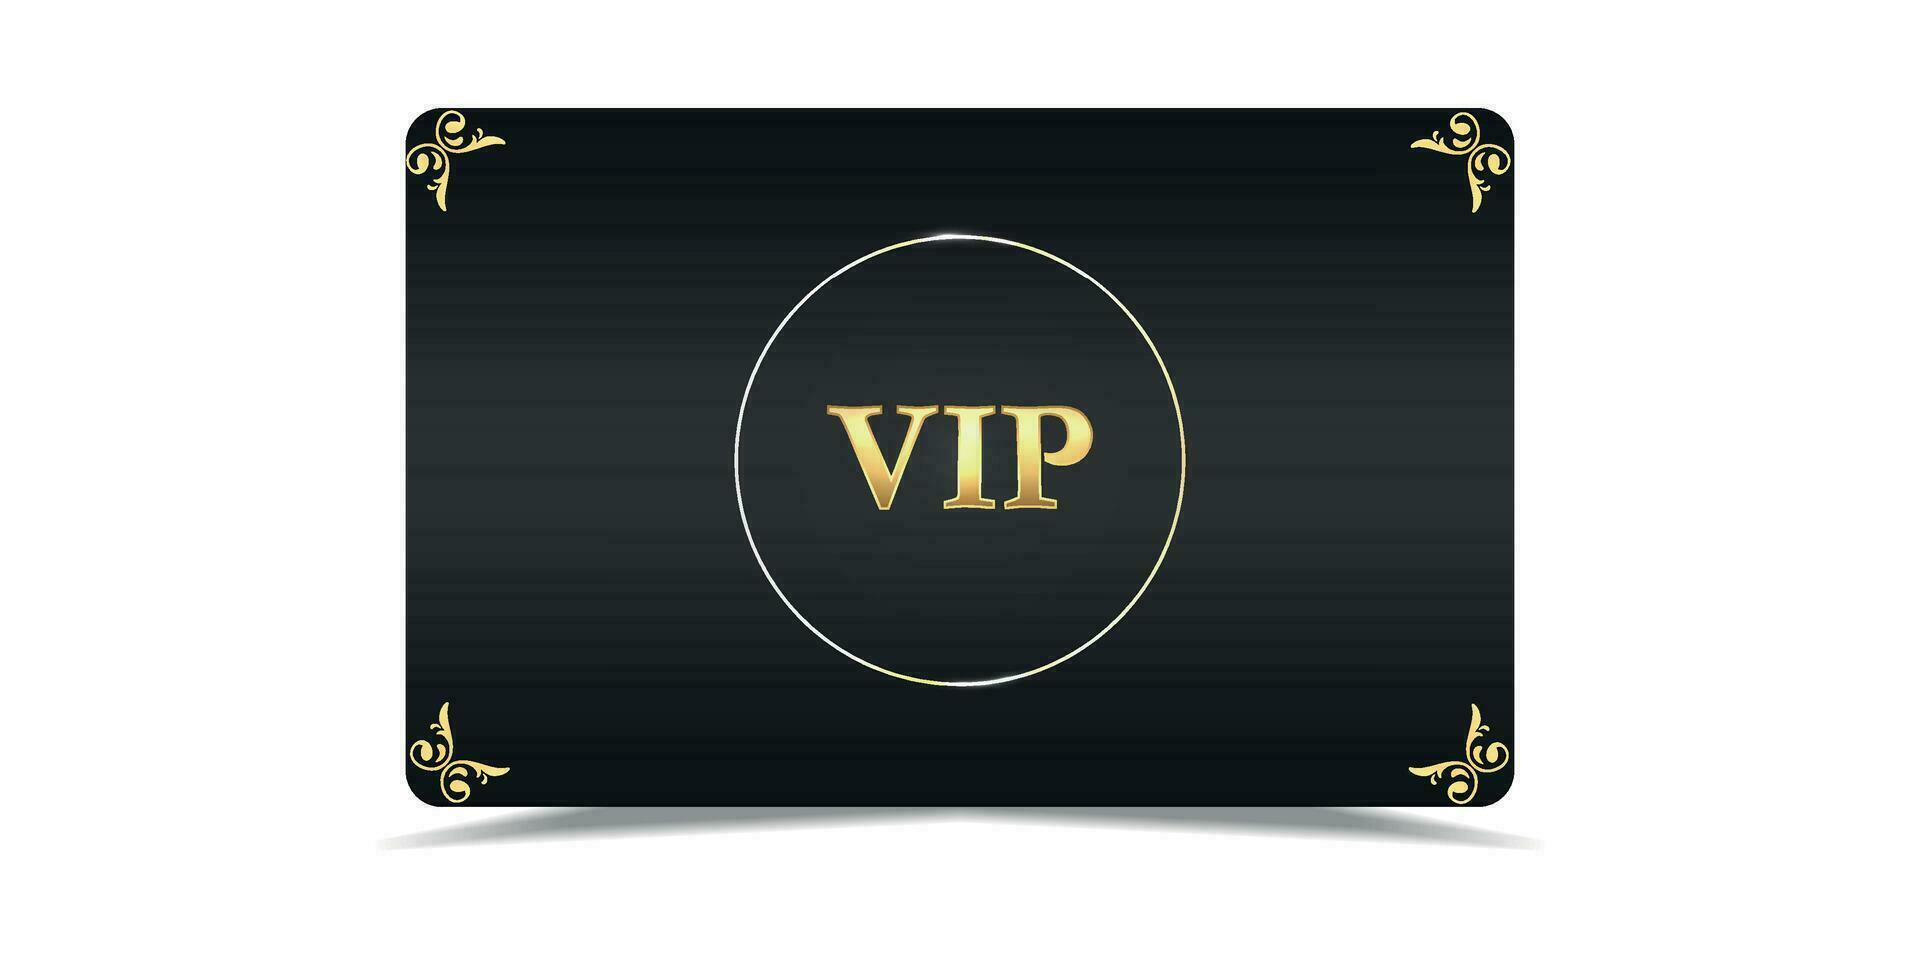 VIP. Vip in abstract style on black background. VIP card. Luxury template design. VIP Invitation. Vip gold ticket. Premium card vector